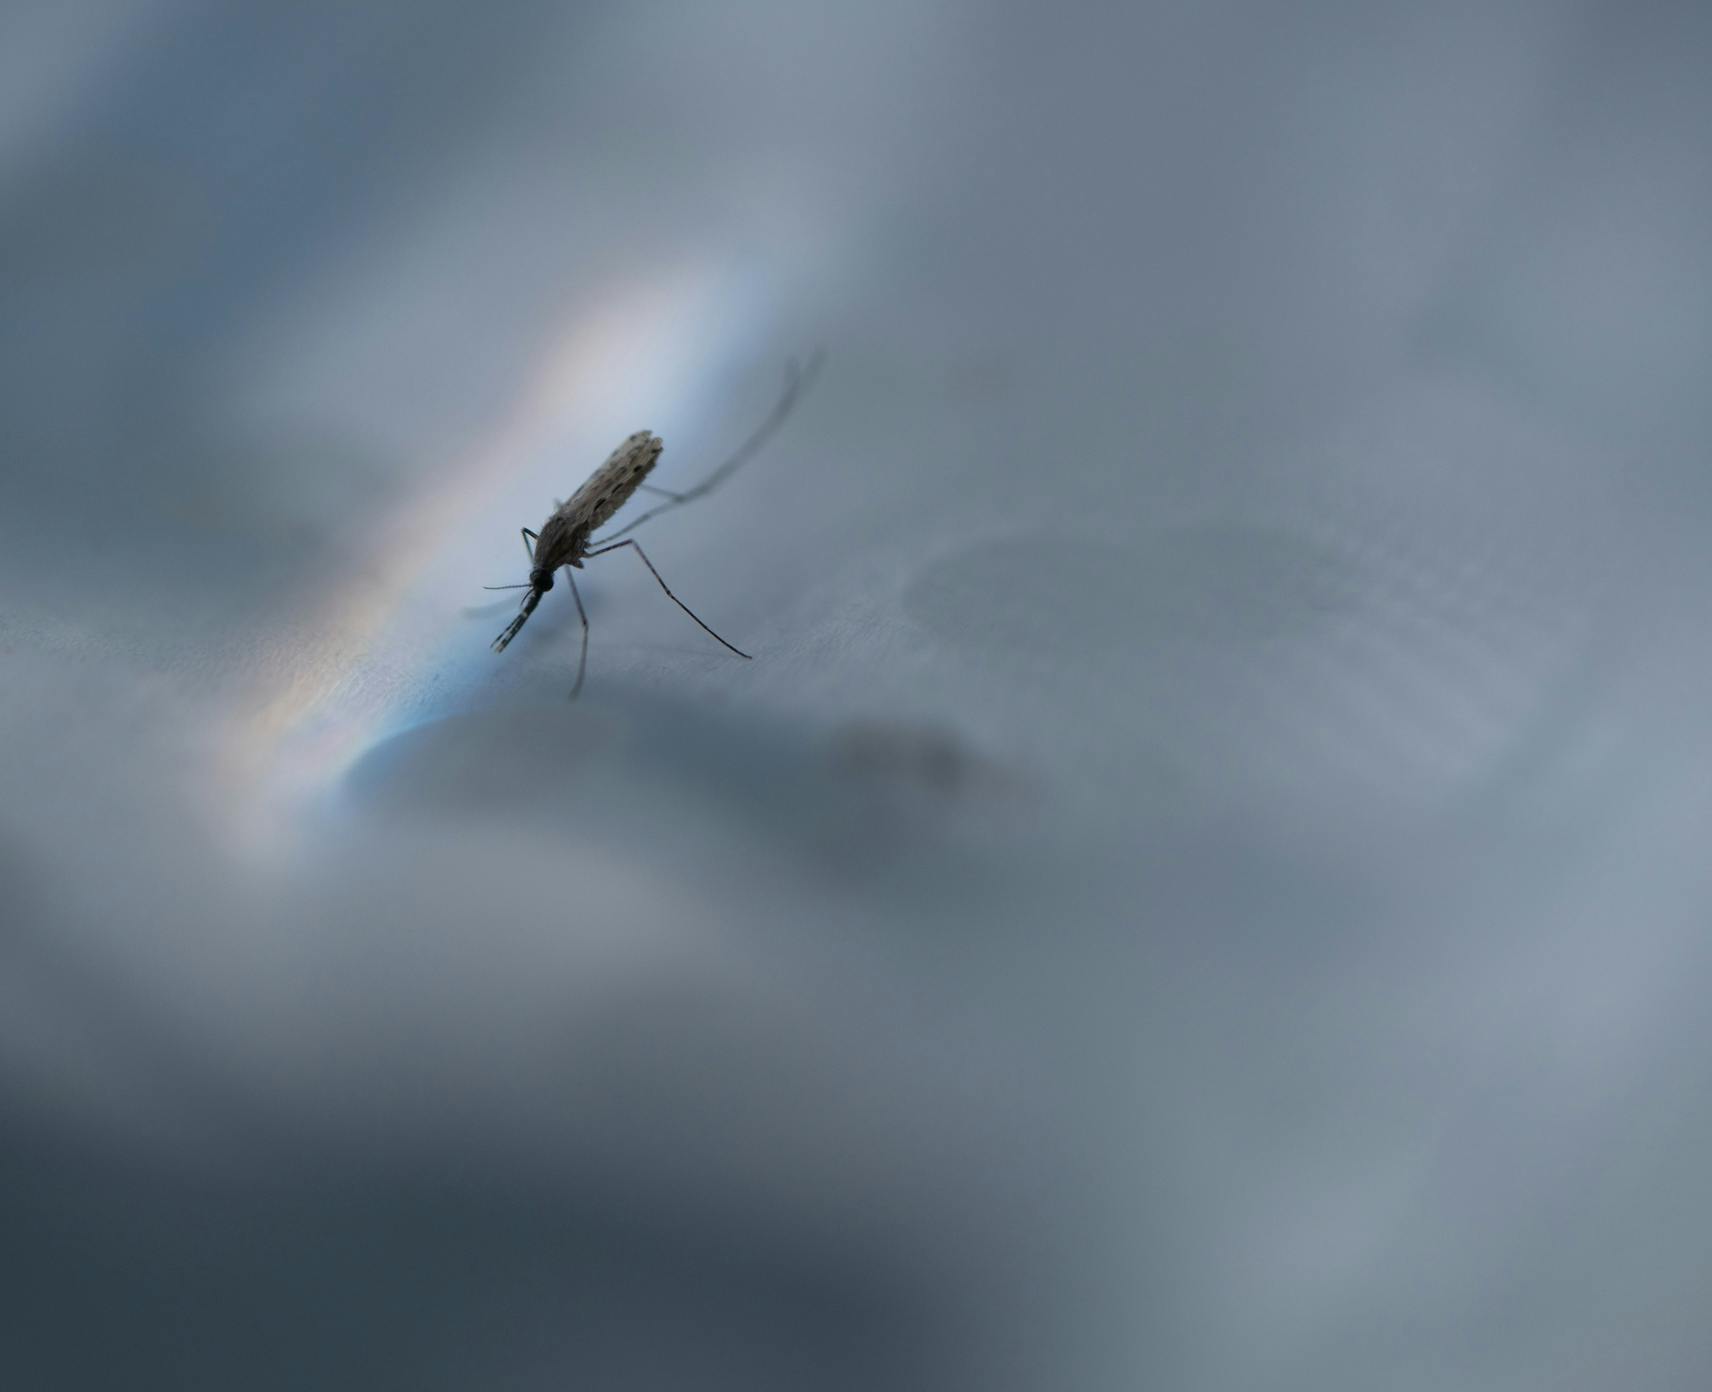 A certain type of mosquito responsible for causing malaria